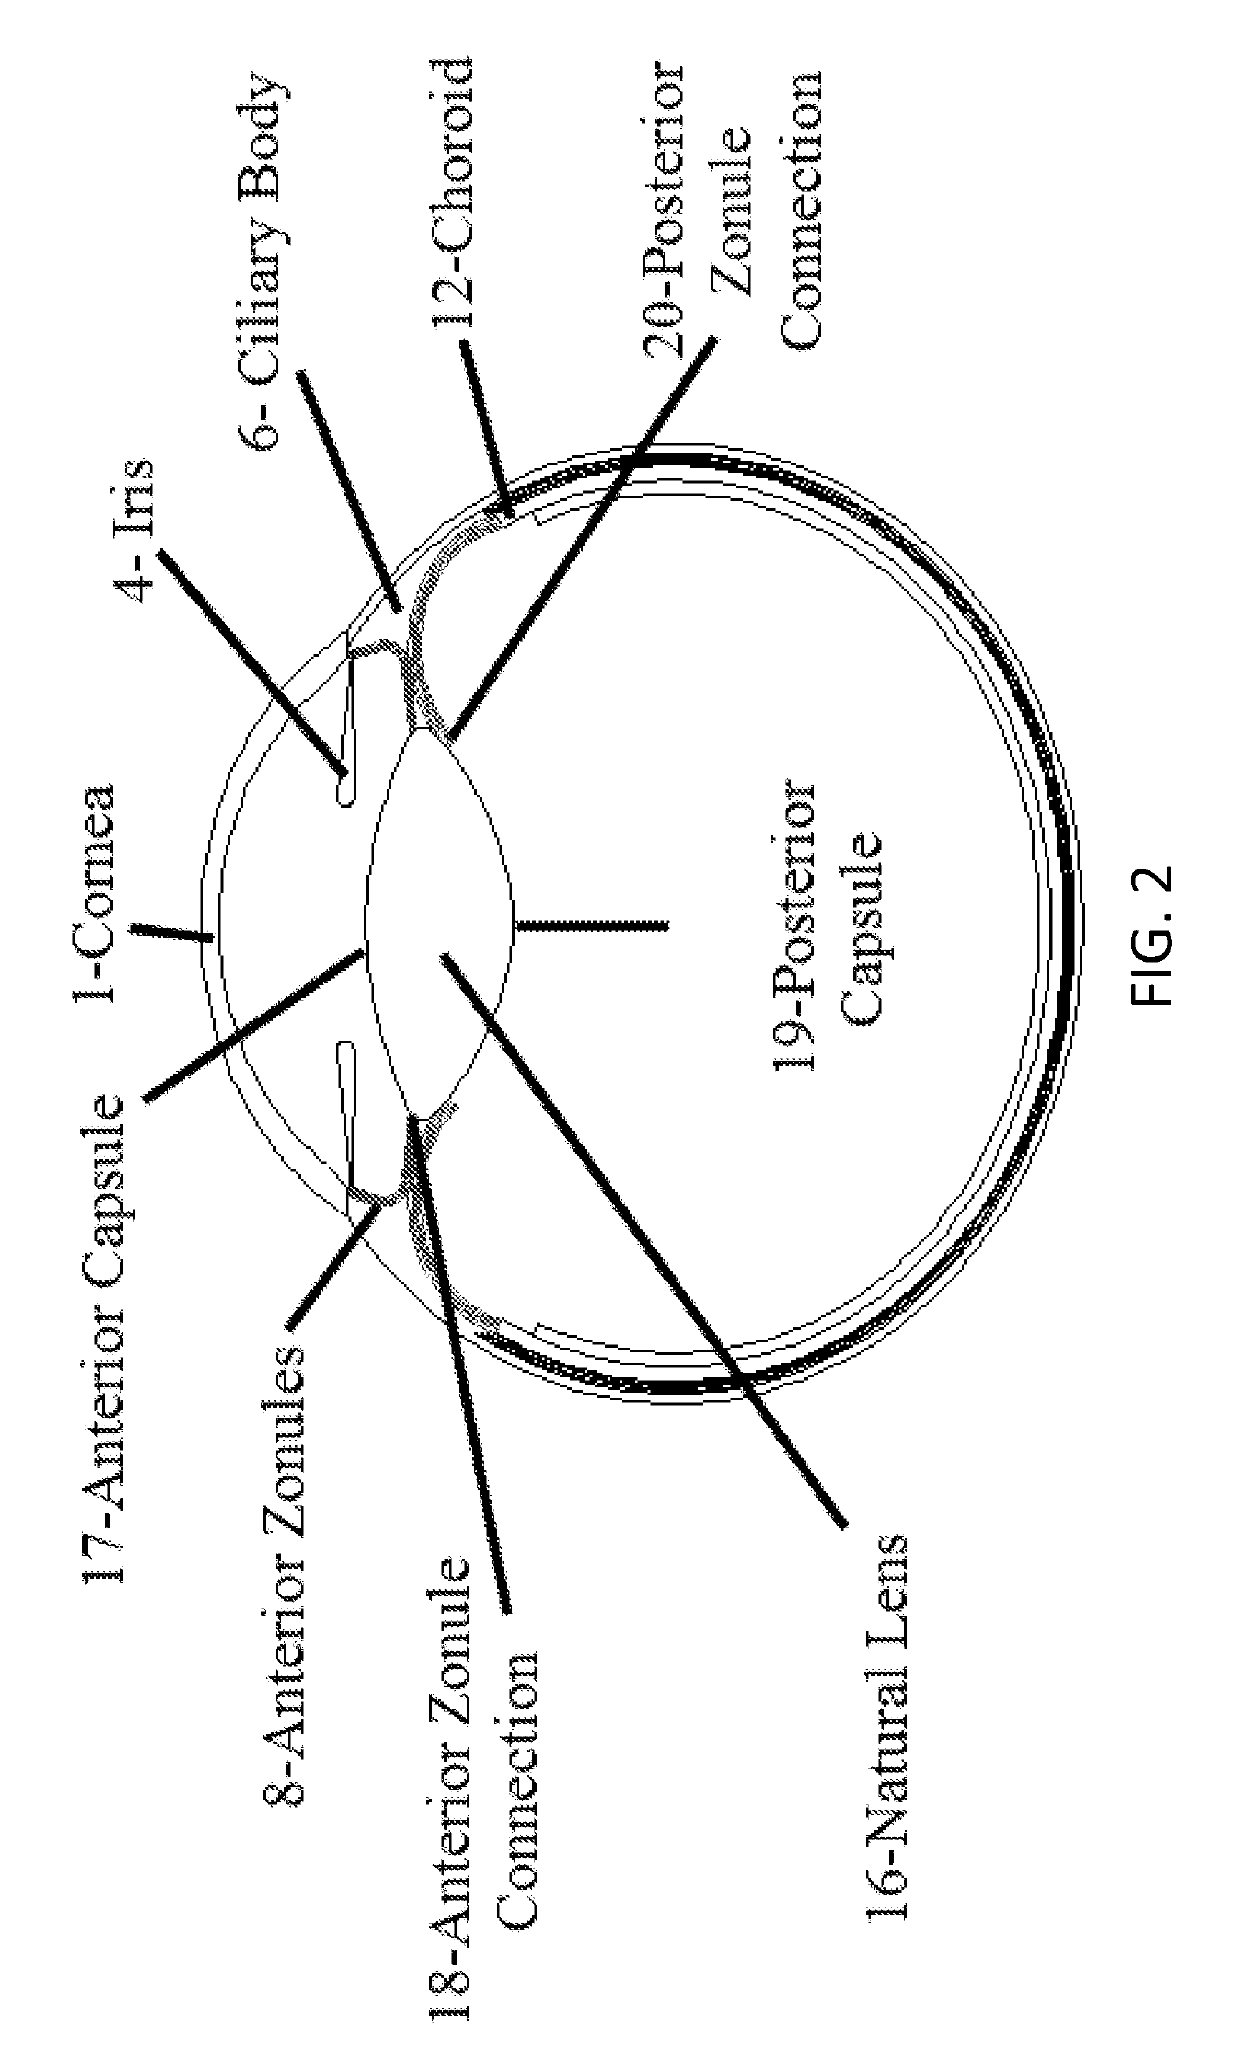 Accommodative intraocular lens that ejects post capsular opacification and self-centers